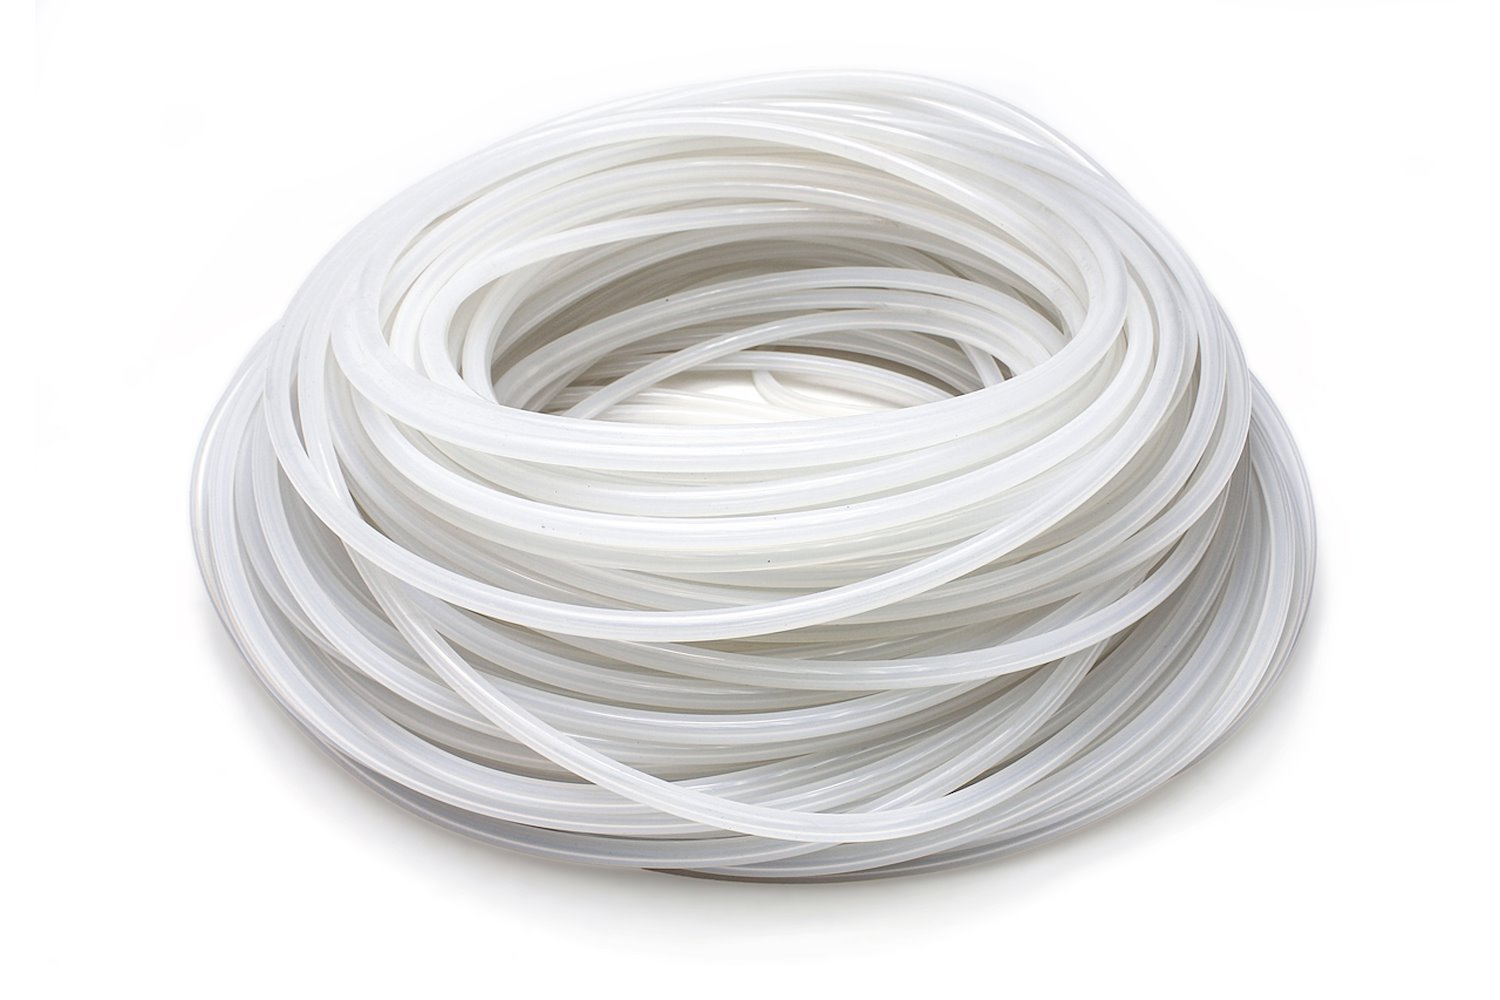 HTSVH95-CLEARx100 High-Temperature Silicone Vacuum Hose Tubing, 3/8 in. ID, 100 ft. Roll, Clear